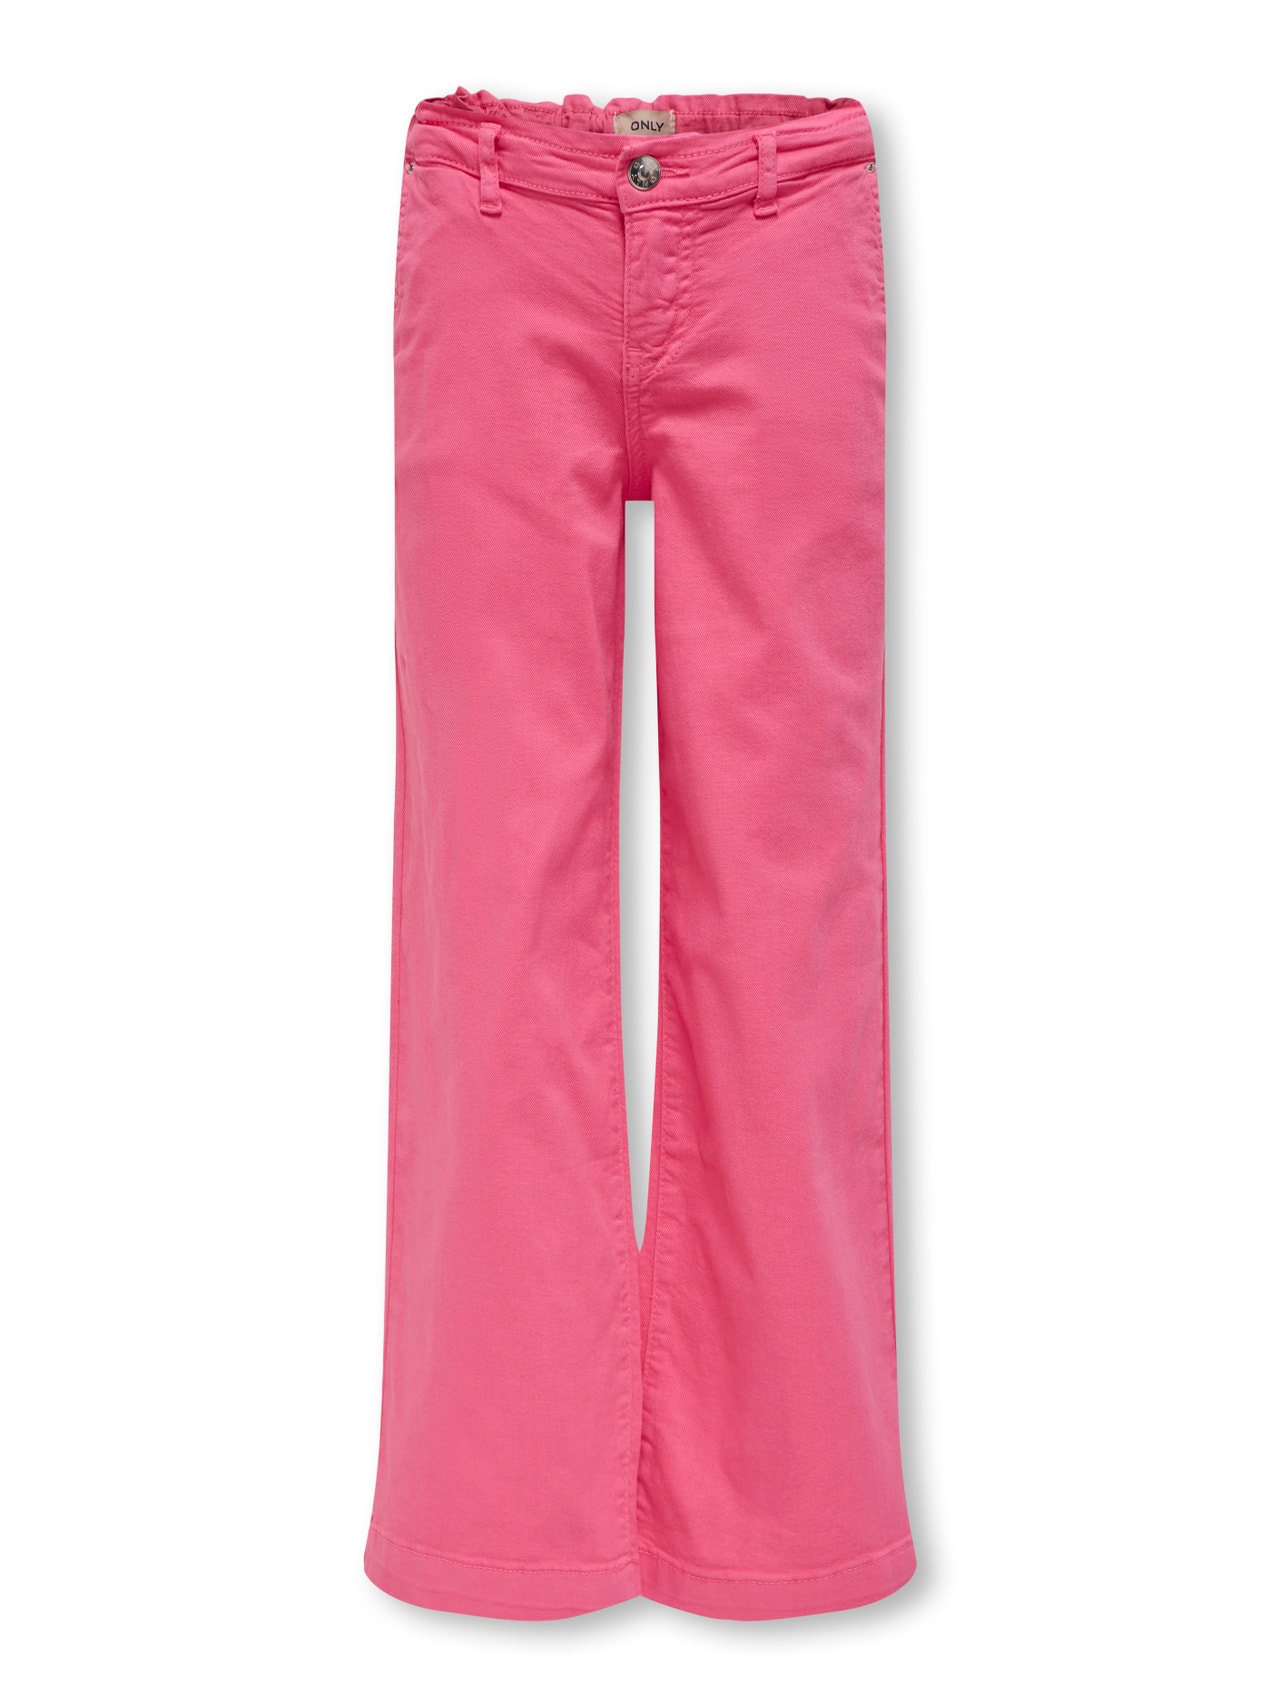 ONLY Cropped Fit Mid waist Trousers -Camellia Rose - 15288709